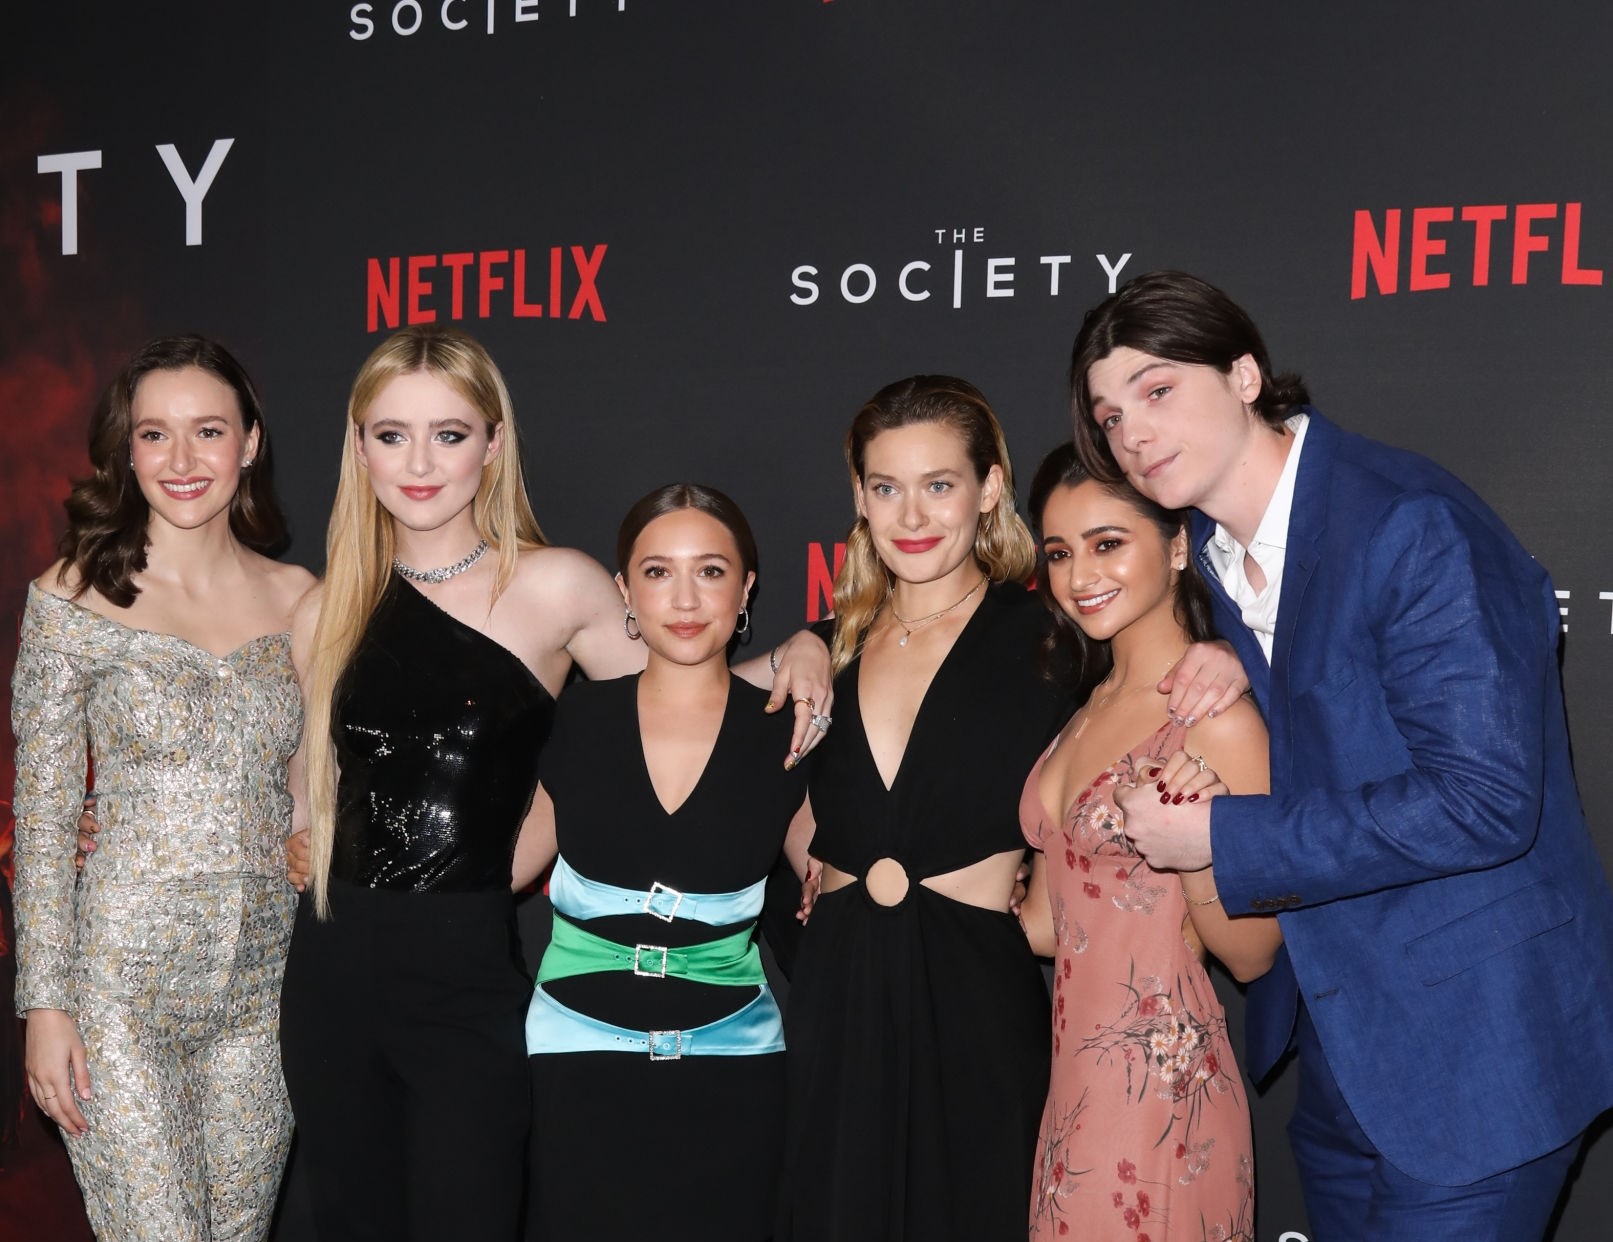 Olivia with her co-actors from Netflix's The Society series, attending an event show. 